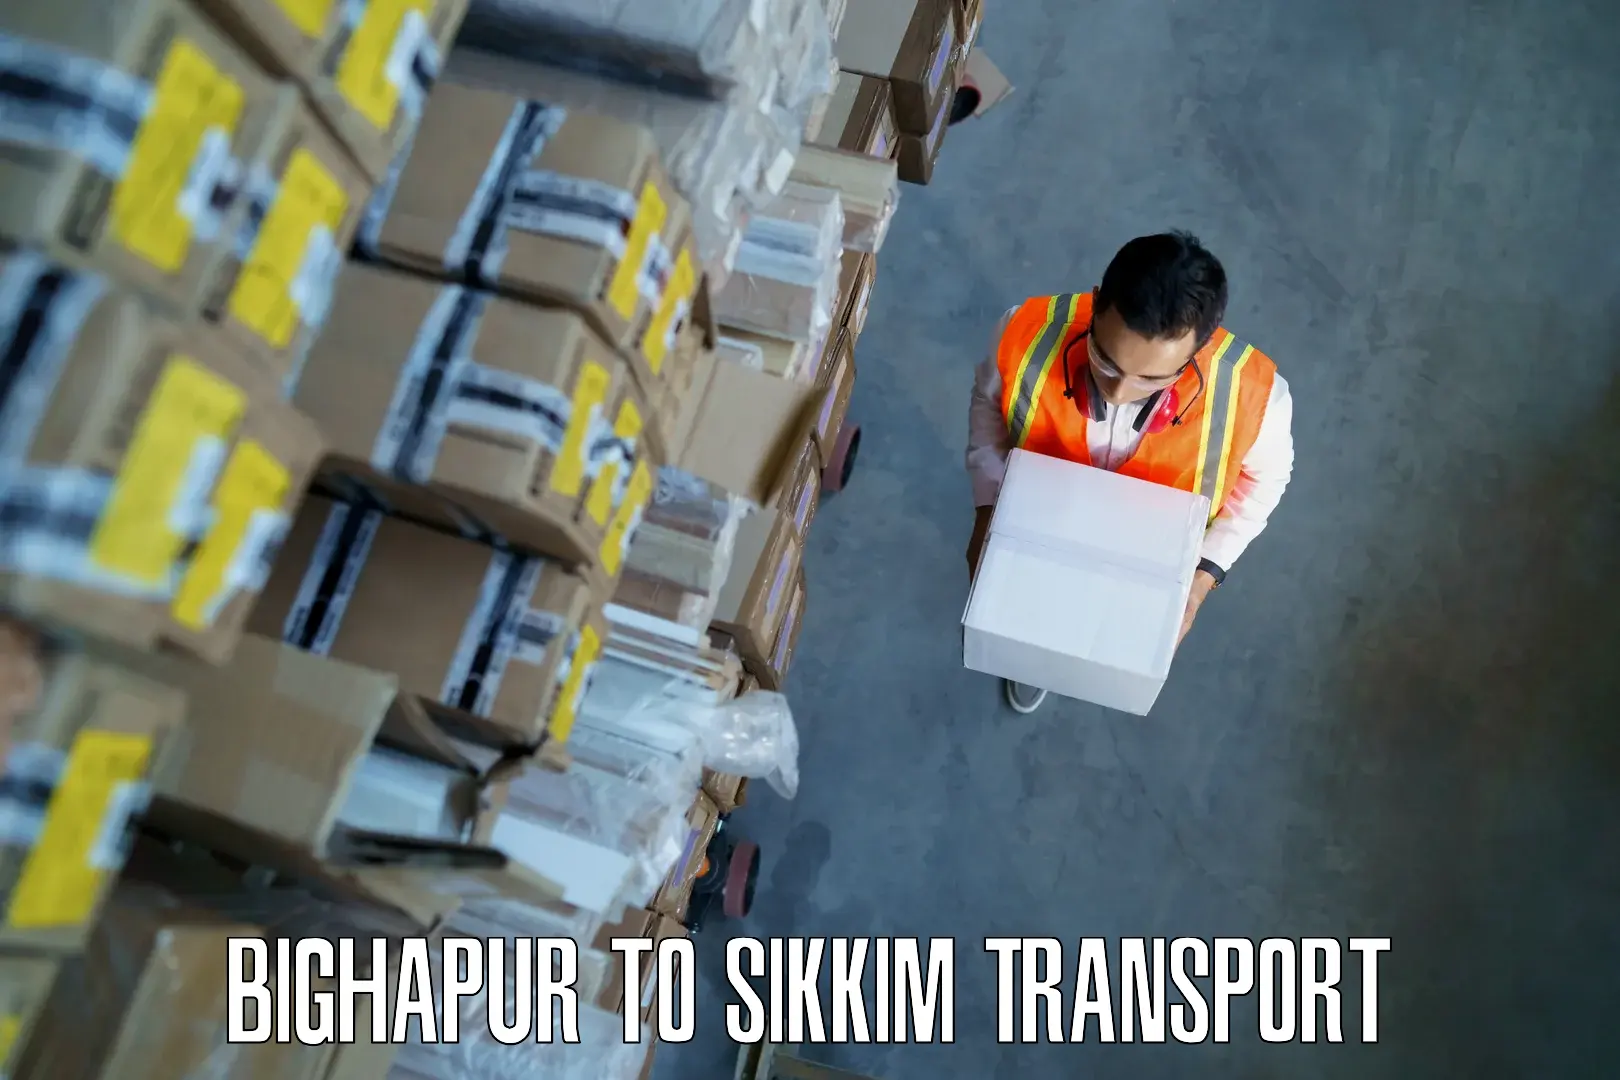 Nearby transport service Bighapur to West Sikkim